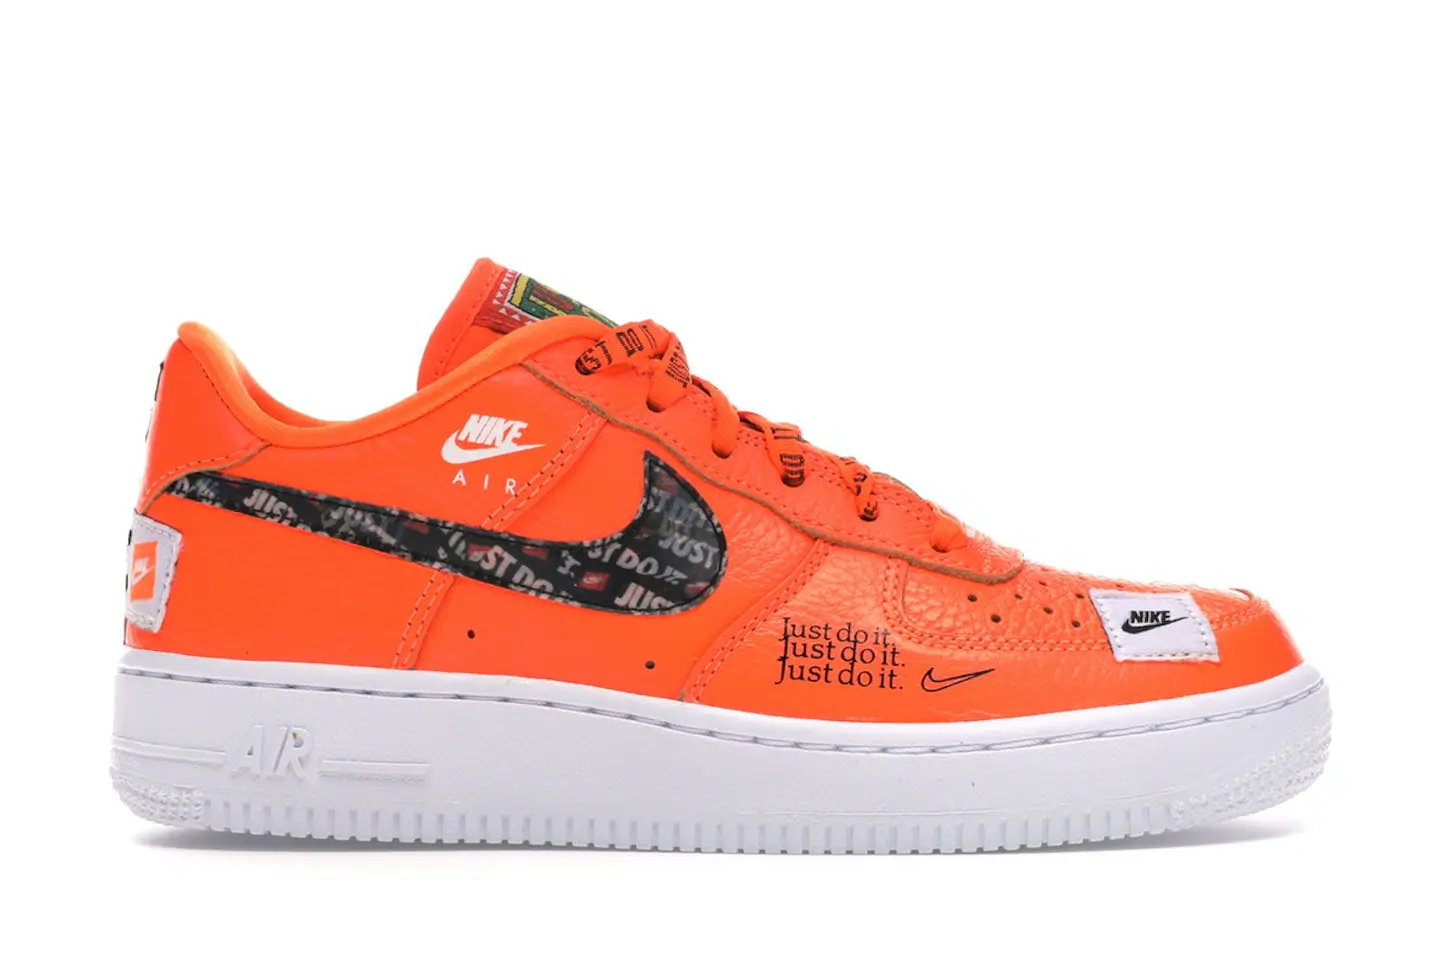 Nike Air Force 1 Low Just Do It Pack Orange (GS) Kids' - AO3977-800 - US